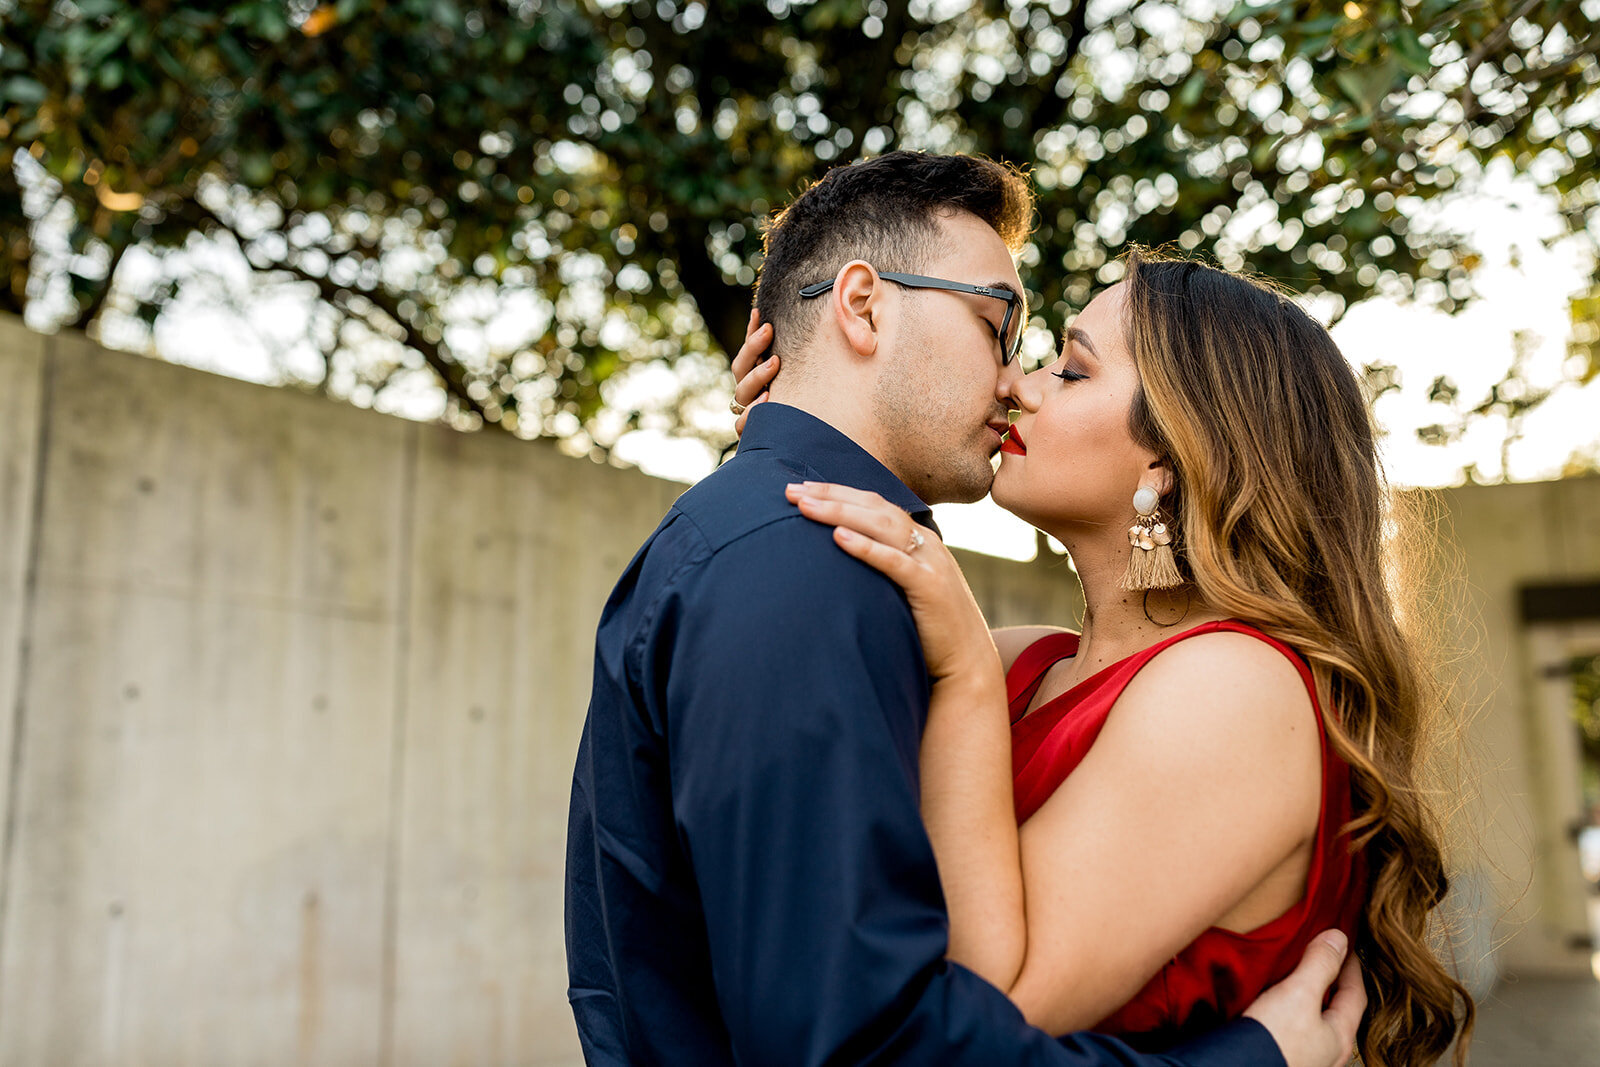 Kori+Tommy_Memorial Park and Downtown Houston Engagements_29